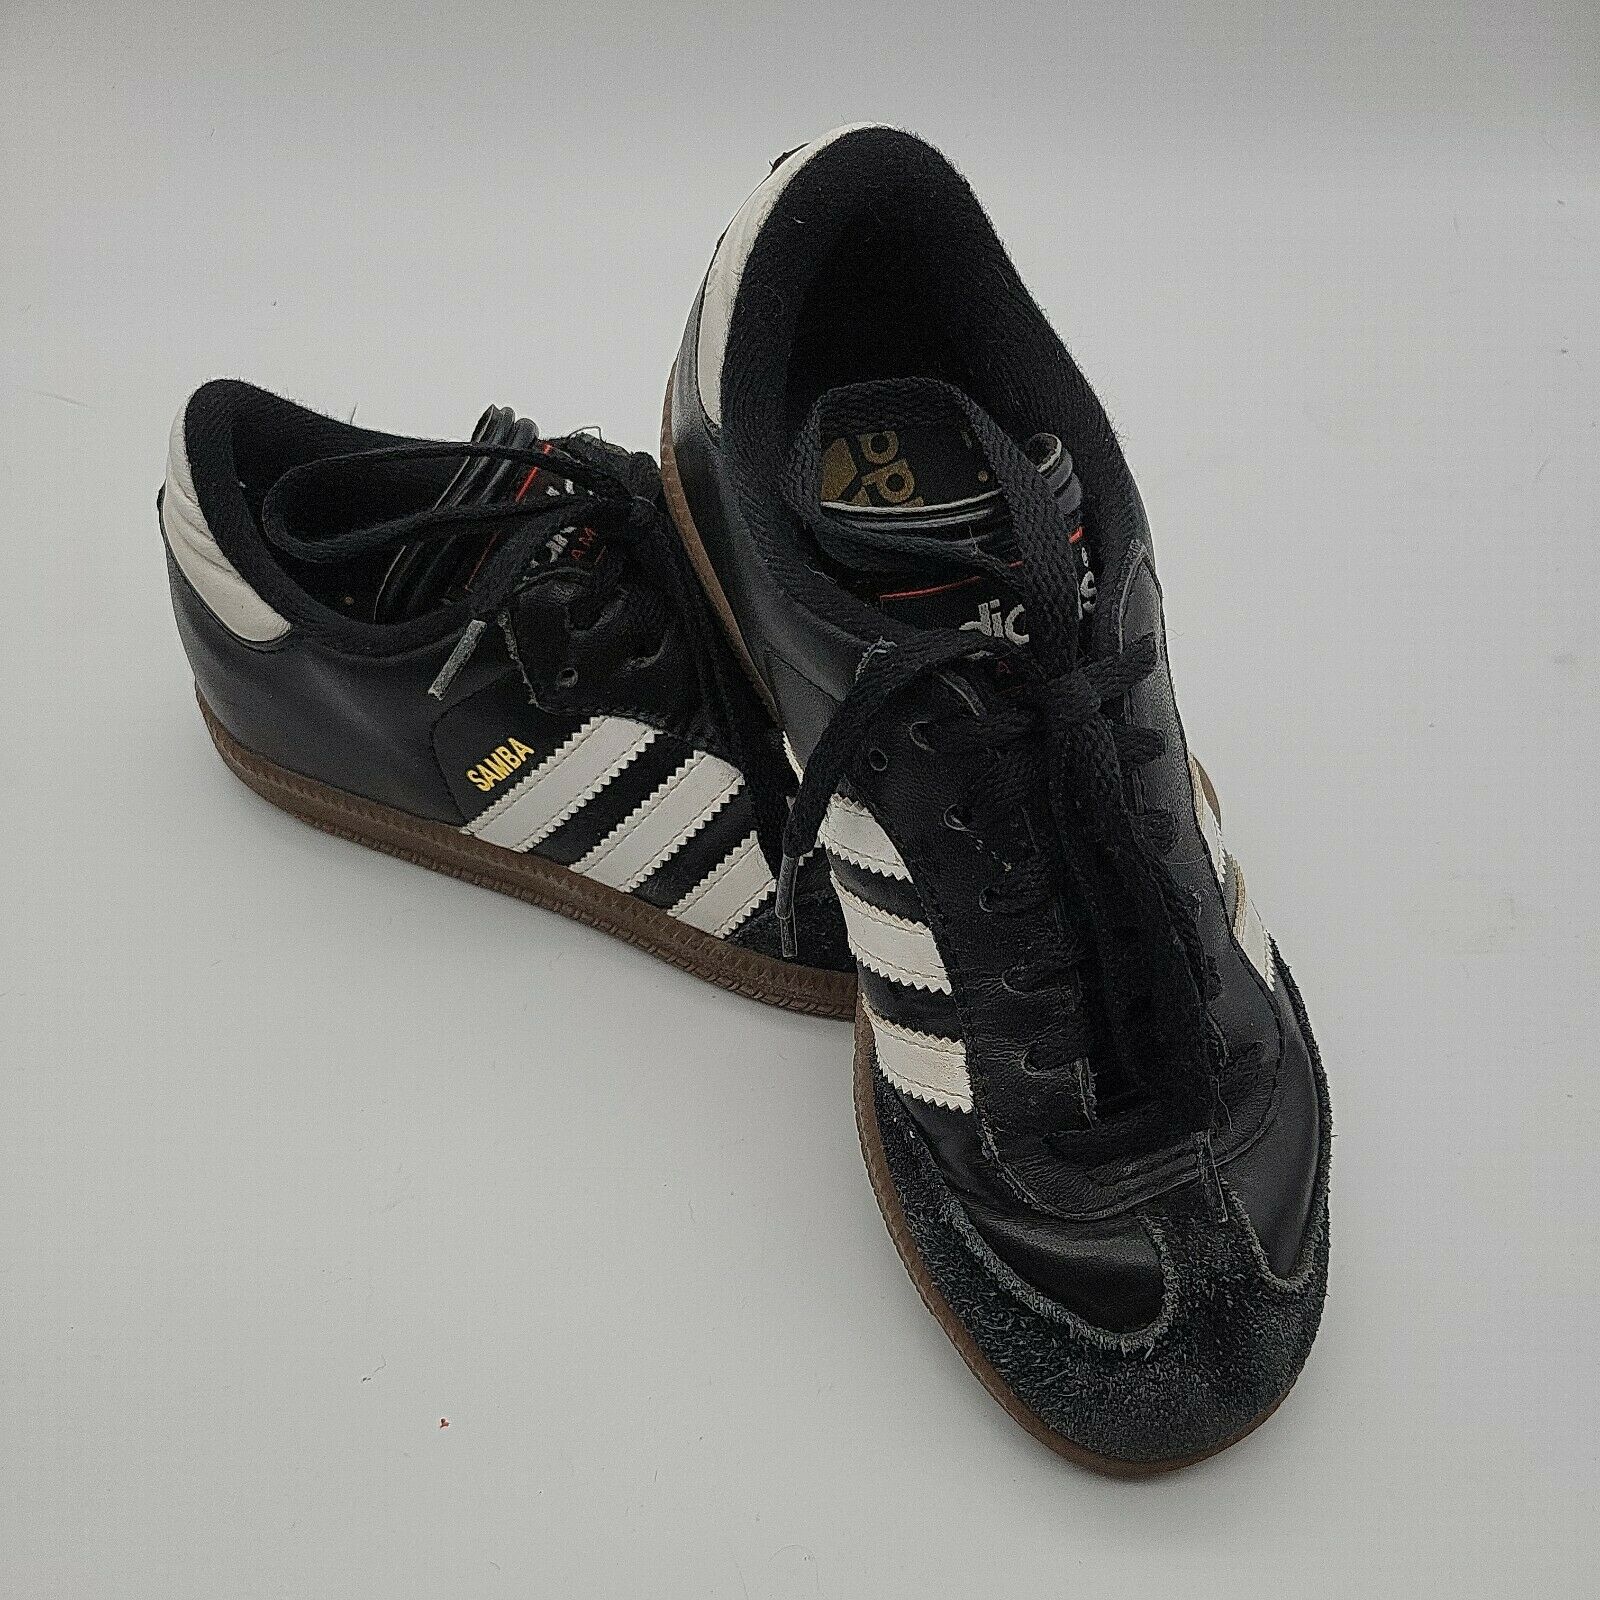 Youth Boys Adidas Samba Black/White Indoor Soccer Shoes Size 2 Great Condition